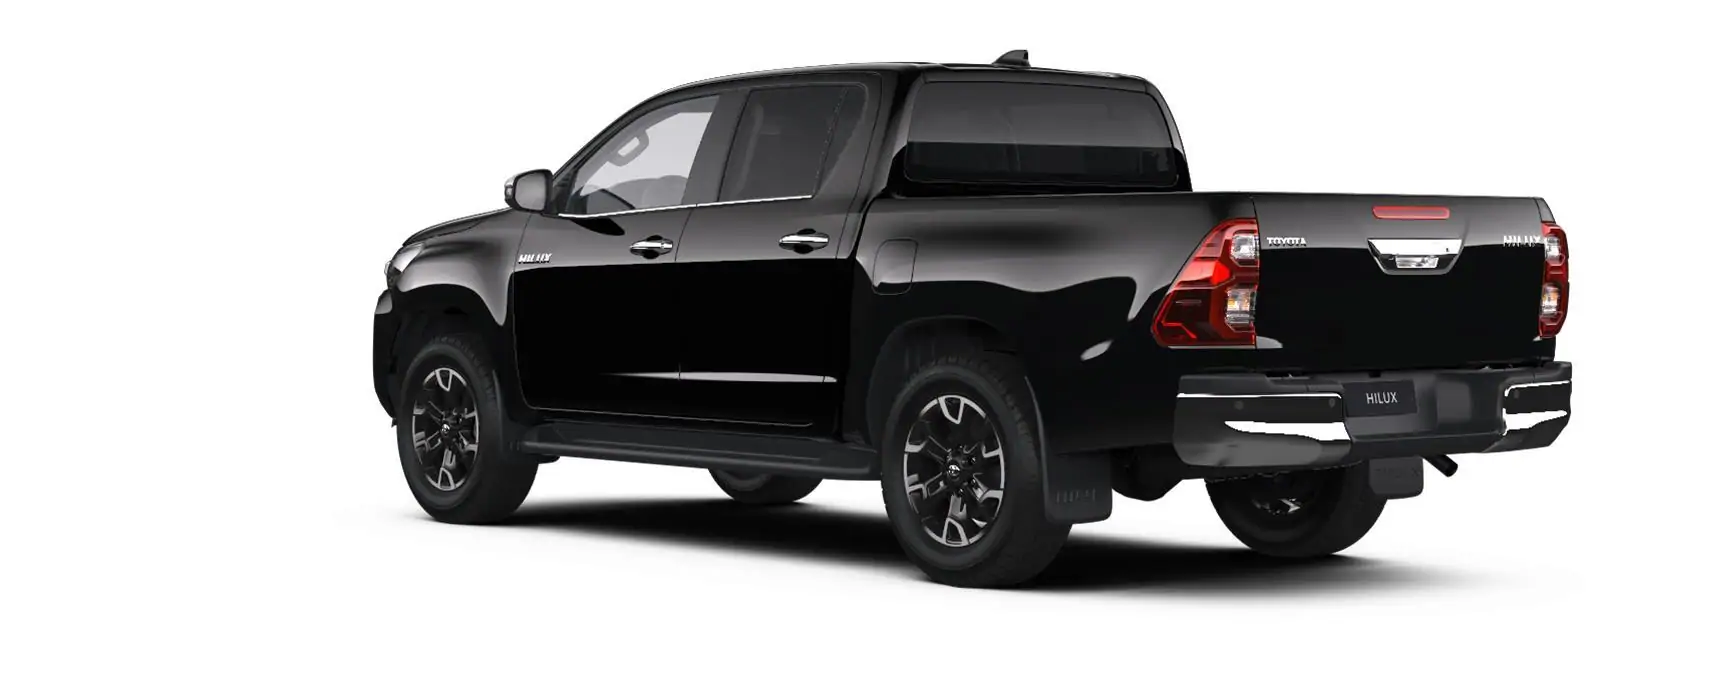 Nieuw Toyota Hilux 4x4 Double Cab 2.8 204hp 6AT Lounge LHD 218 - BLACK MICA 2